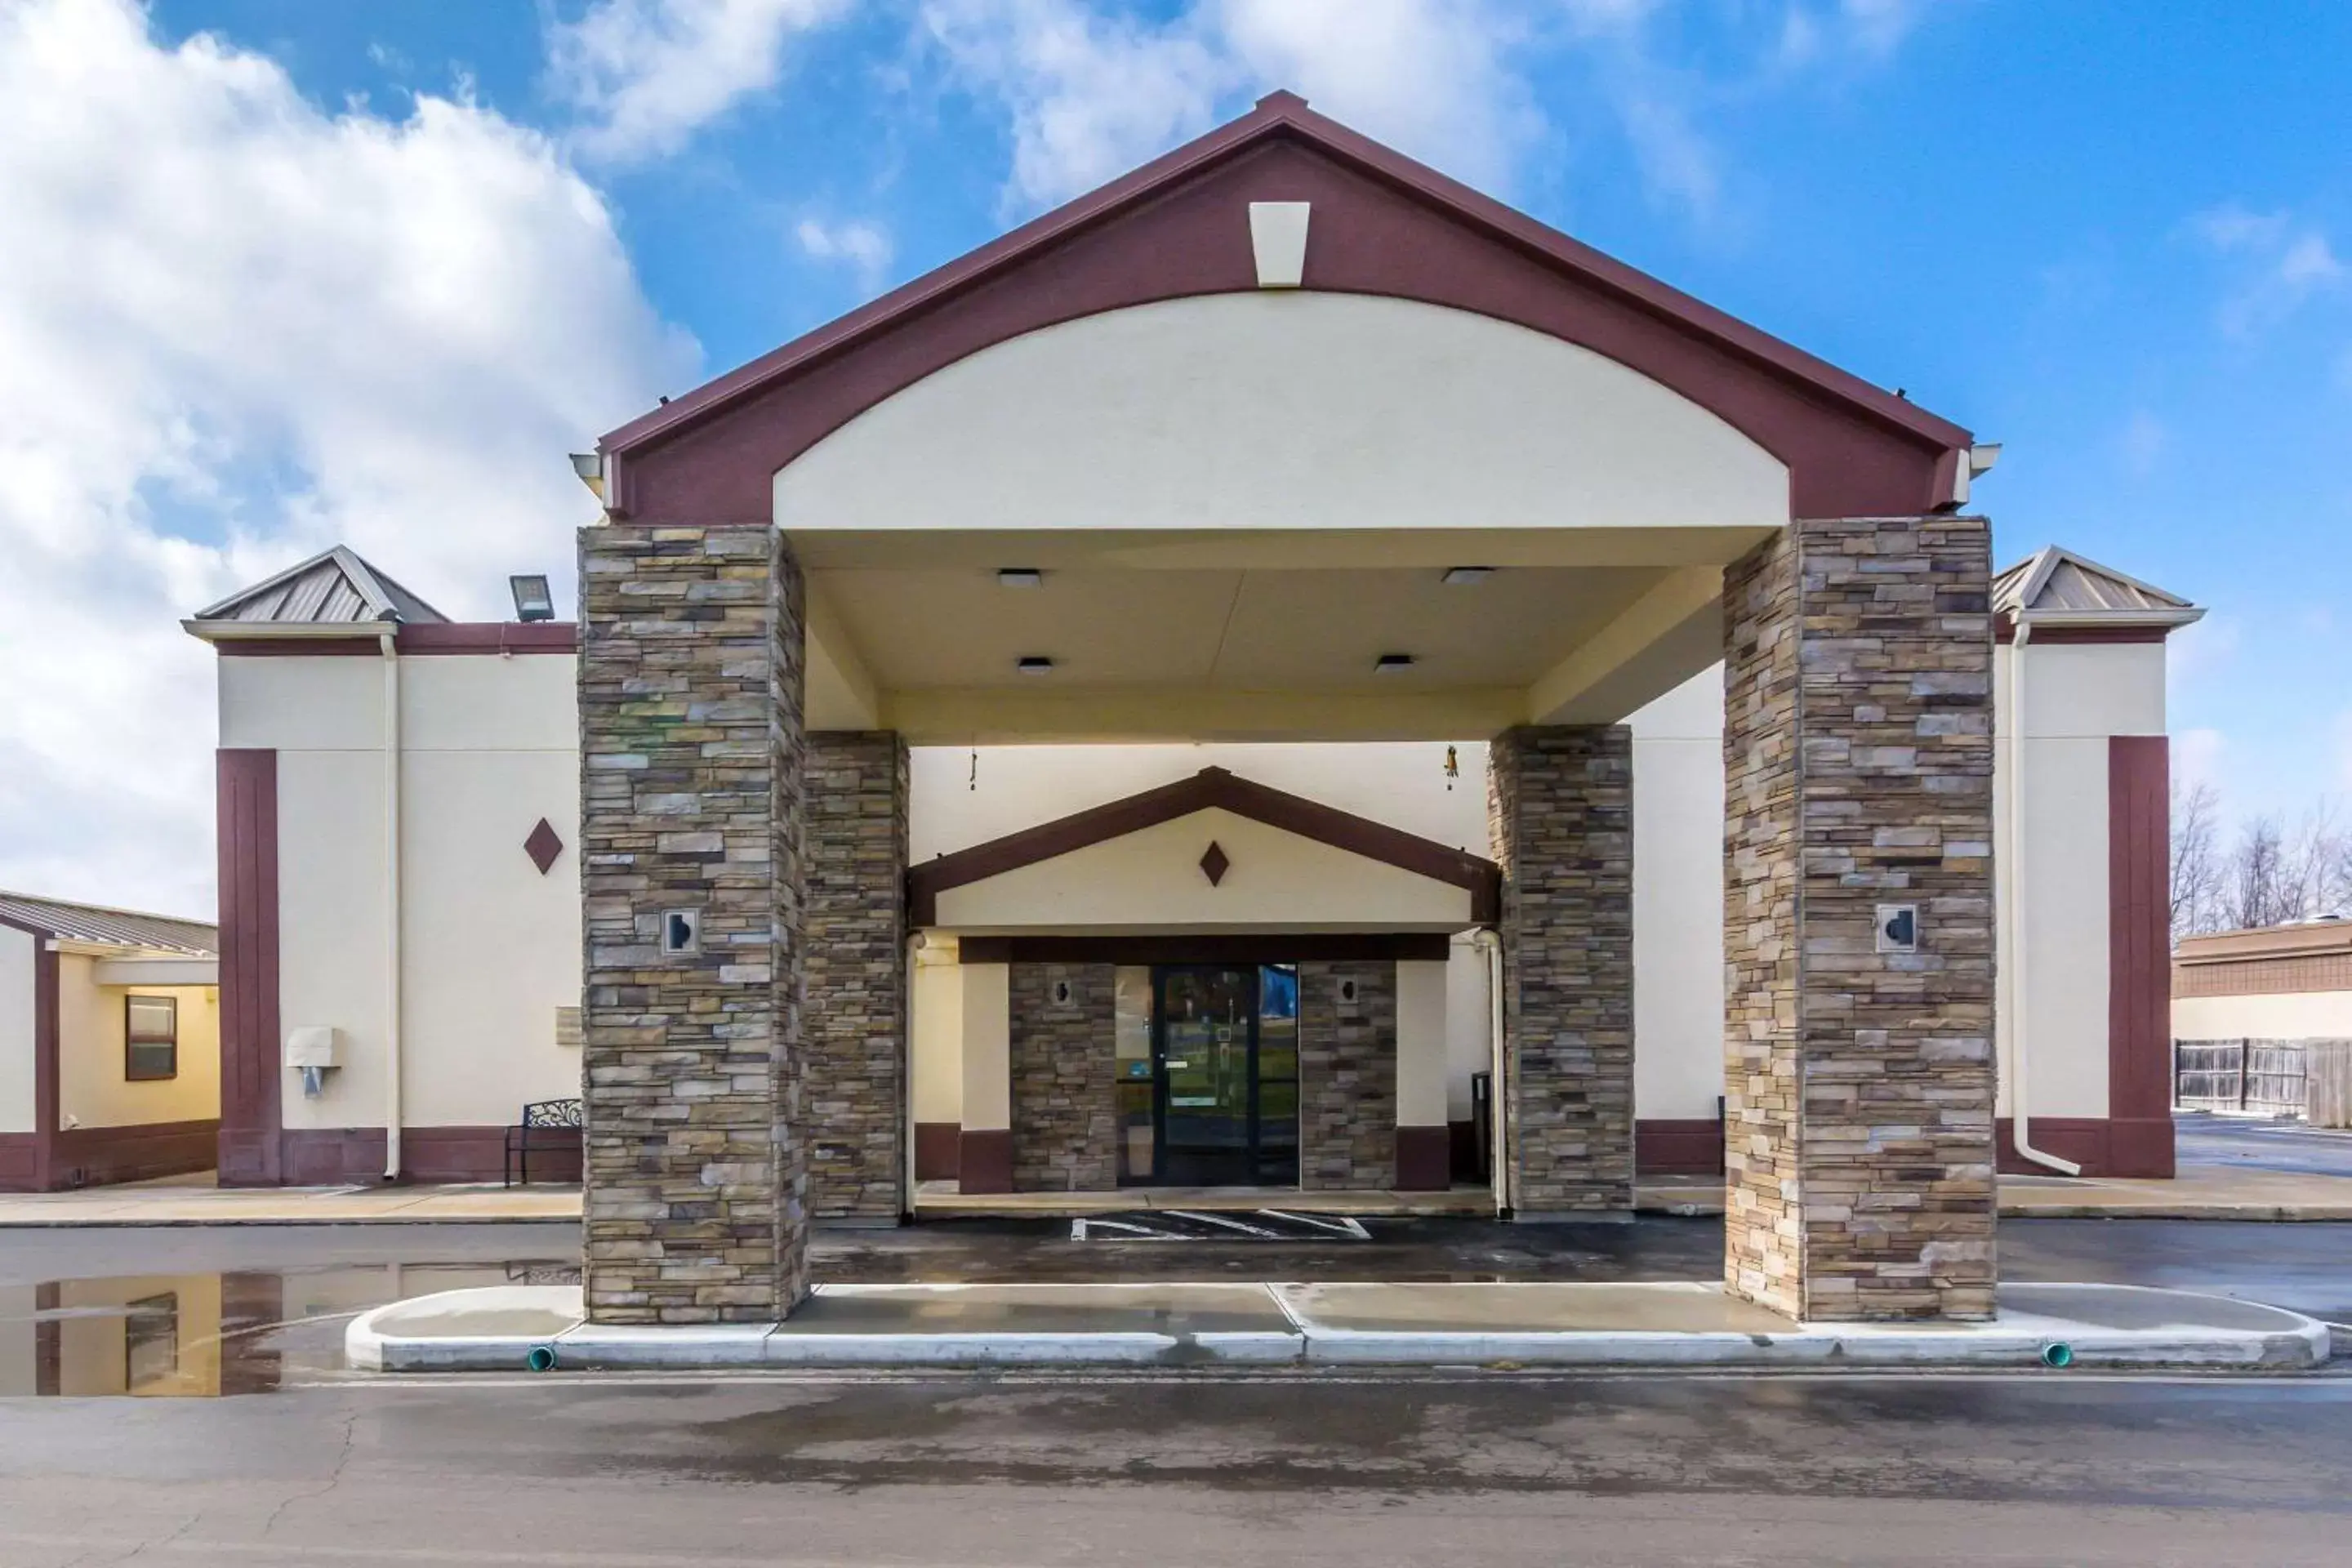 Property building in Econo Lodge Cloverdale